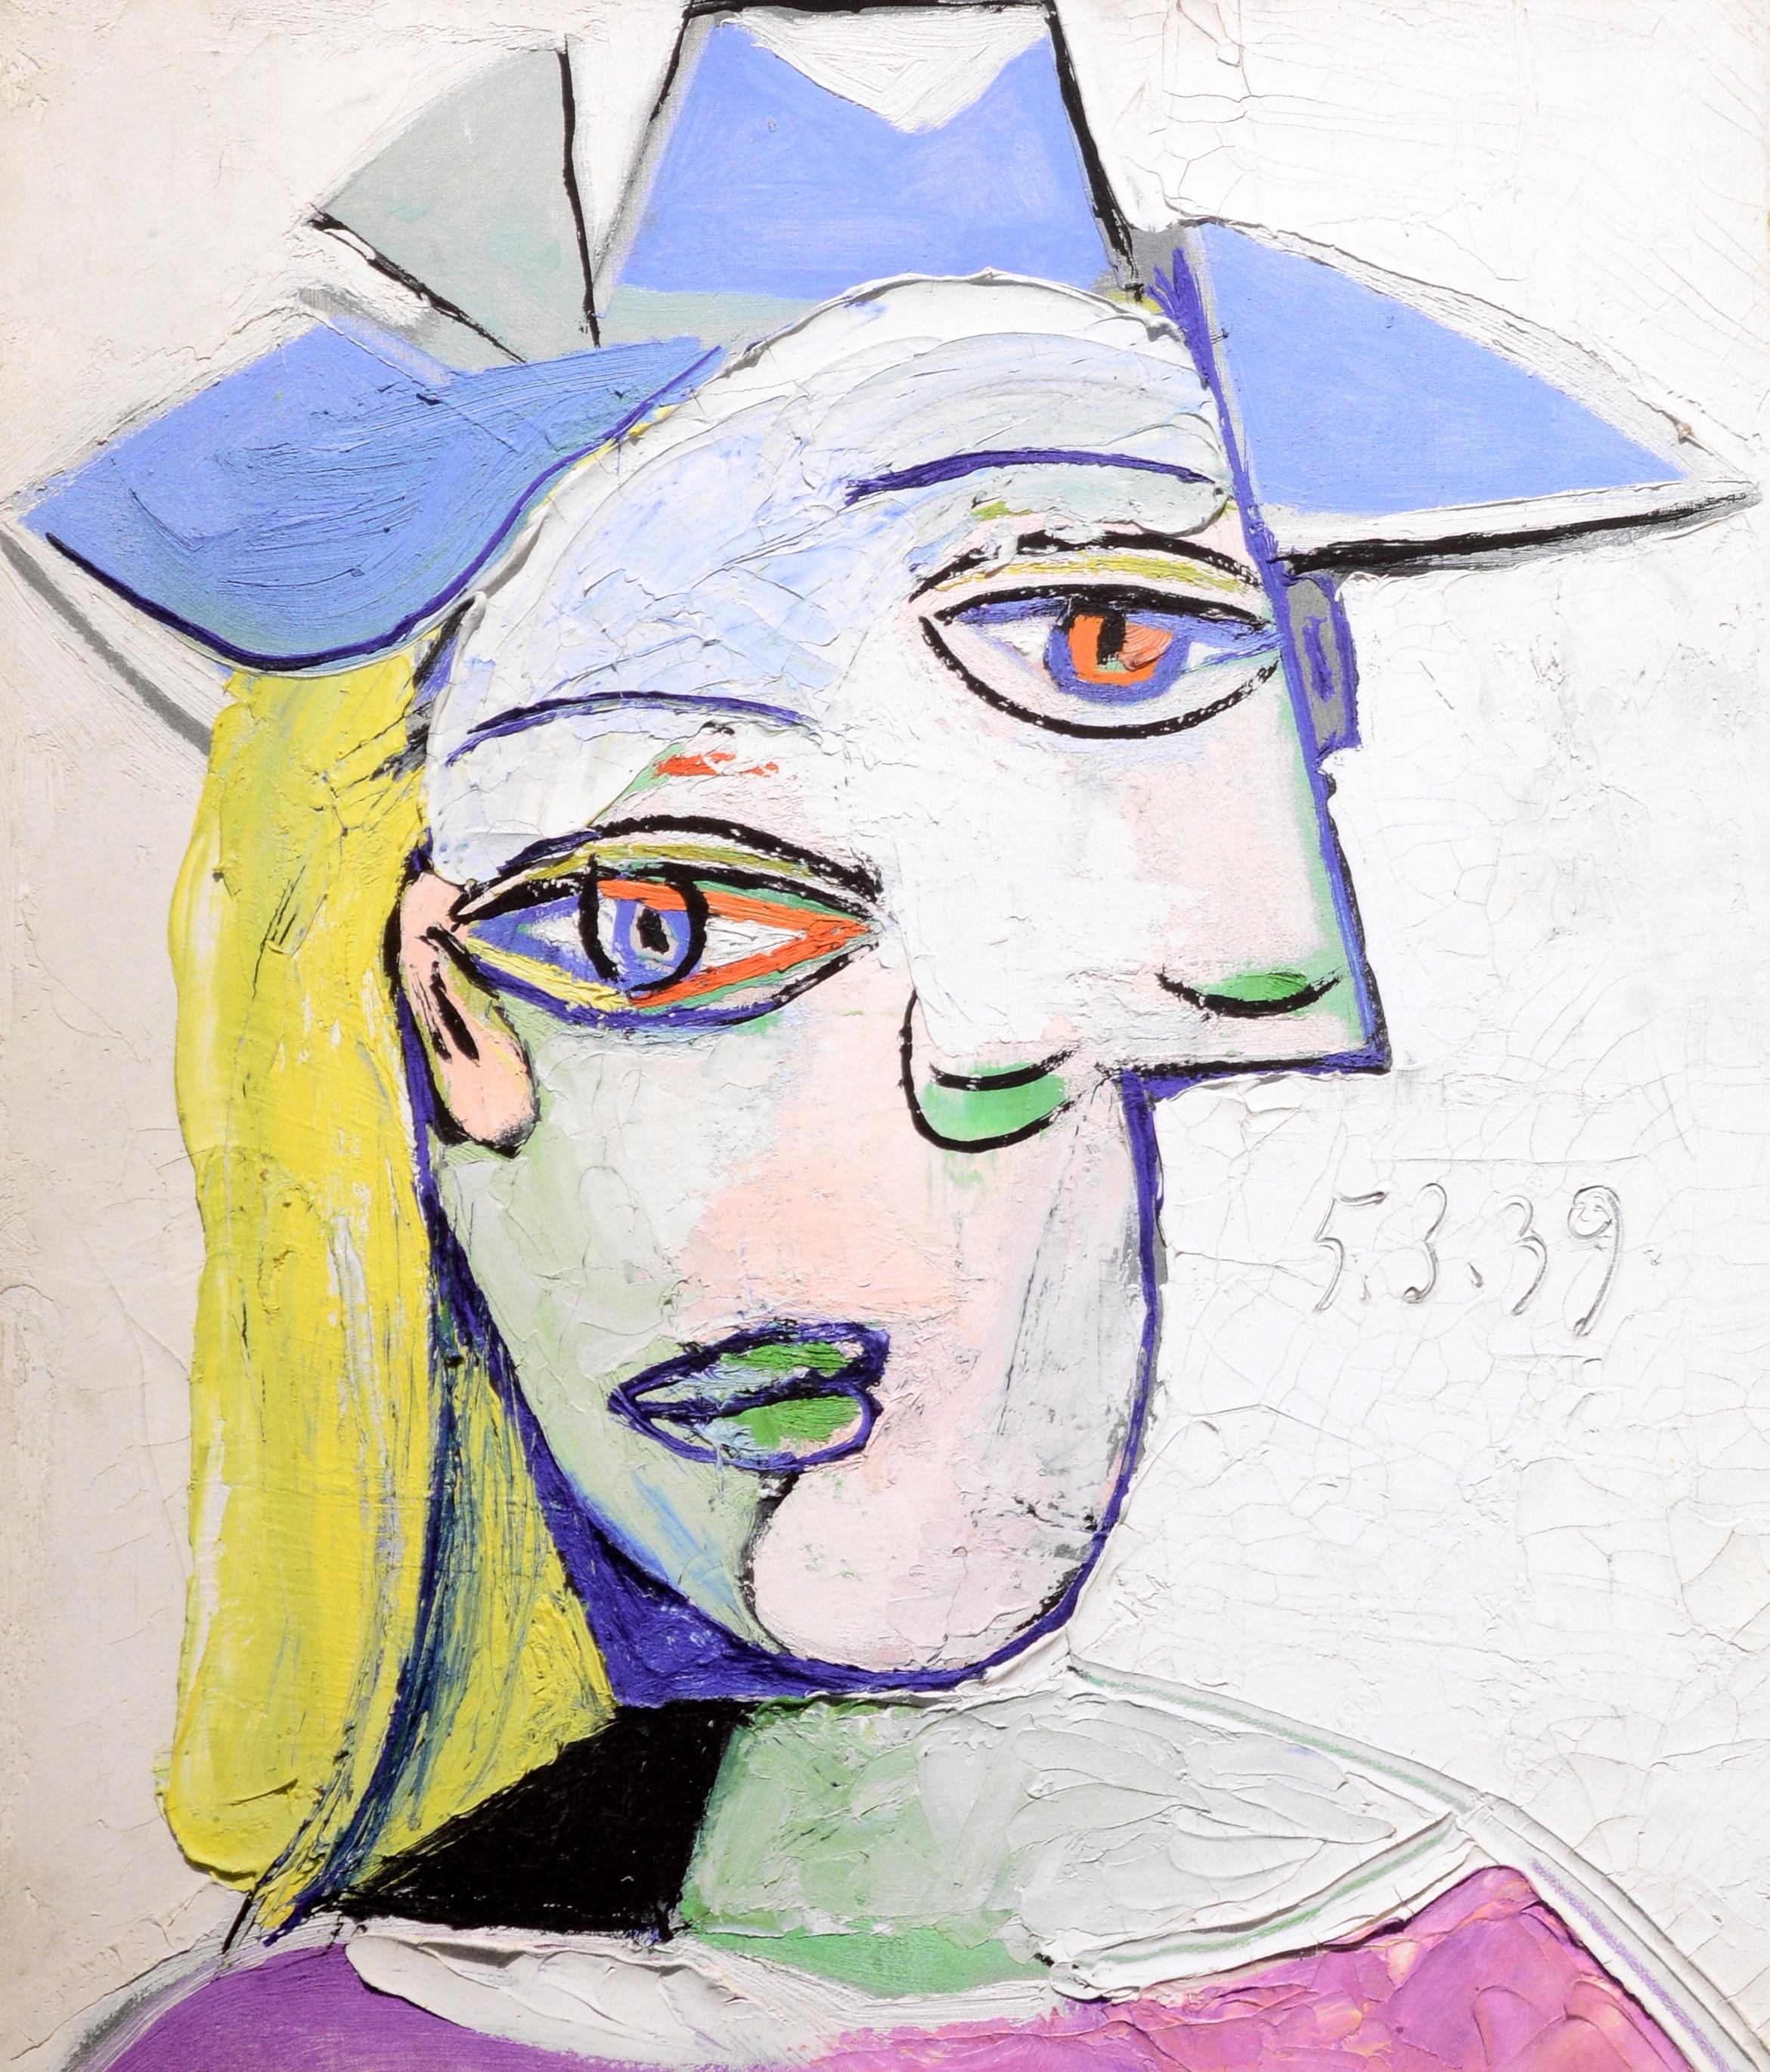 Picasso & Marie-Therese, L'Amour Fou by Richardso & Diana Widmaier, 1st Ed For Sale 3